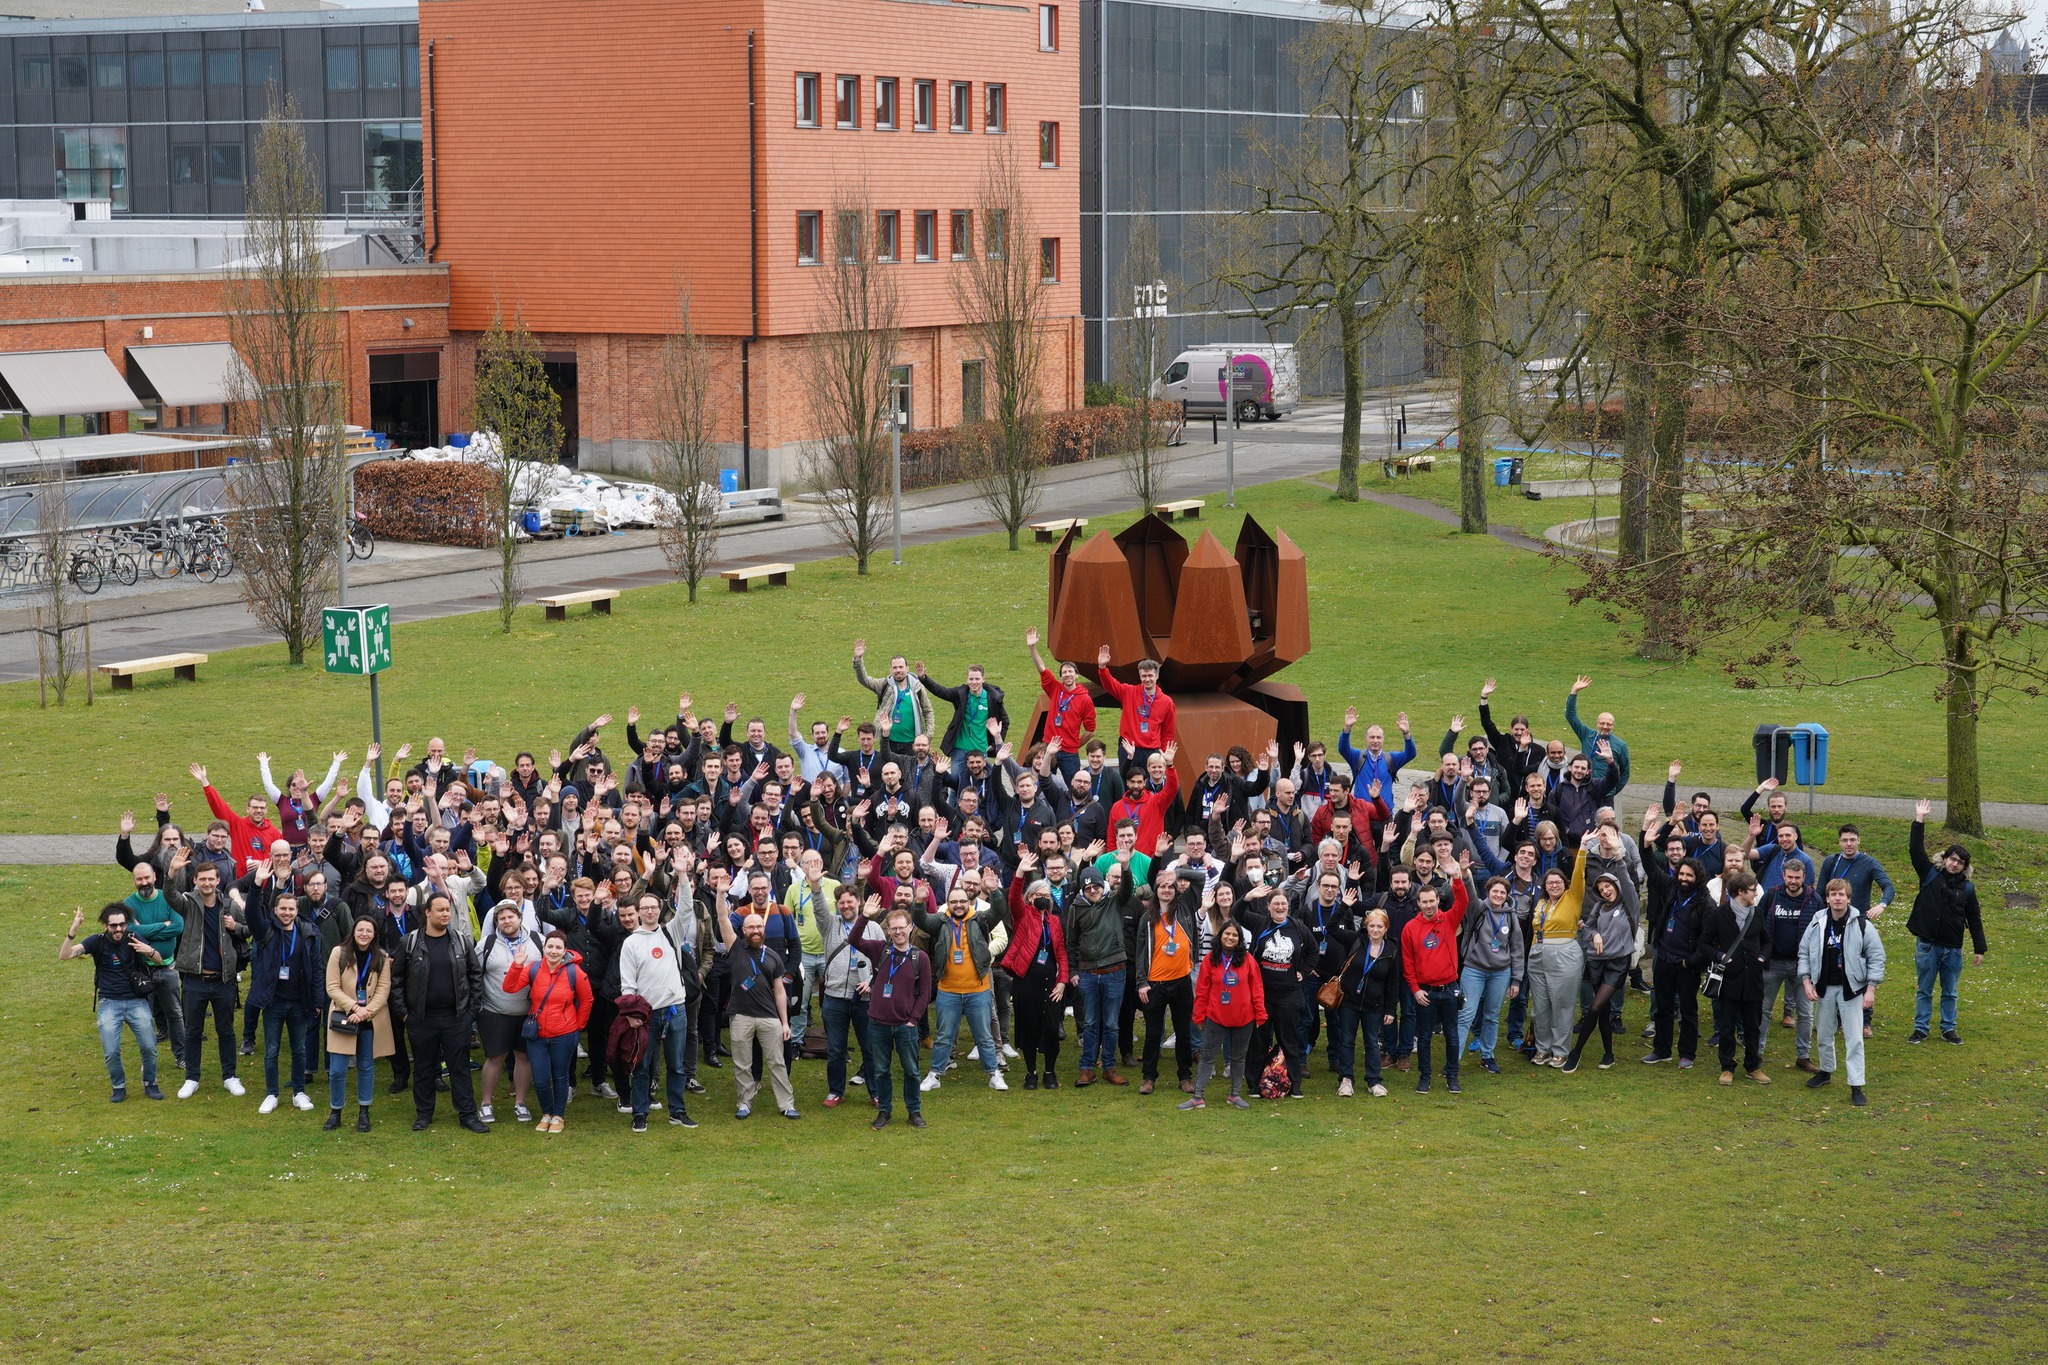 A picture of the Drupal Developer Days participants in 2022 - an event that took place in Gent